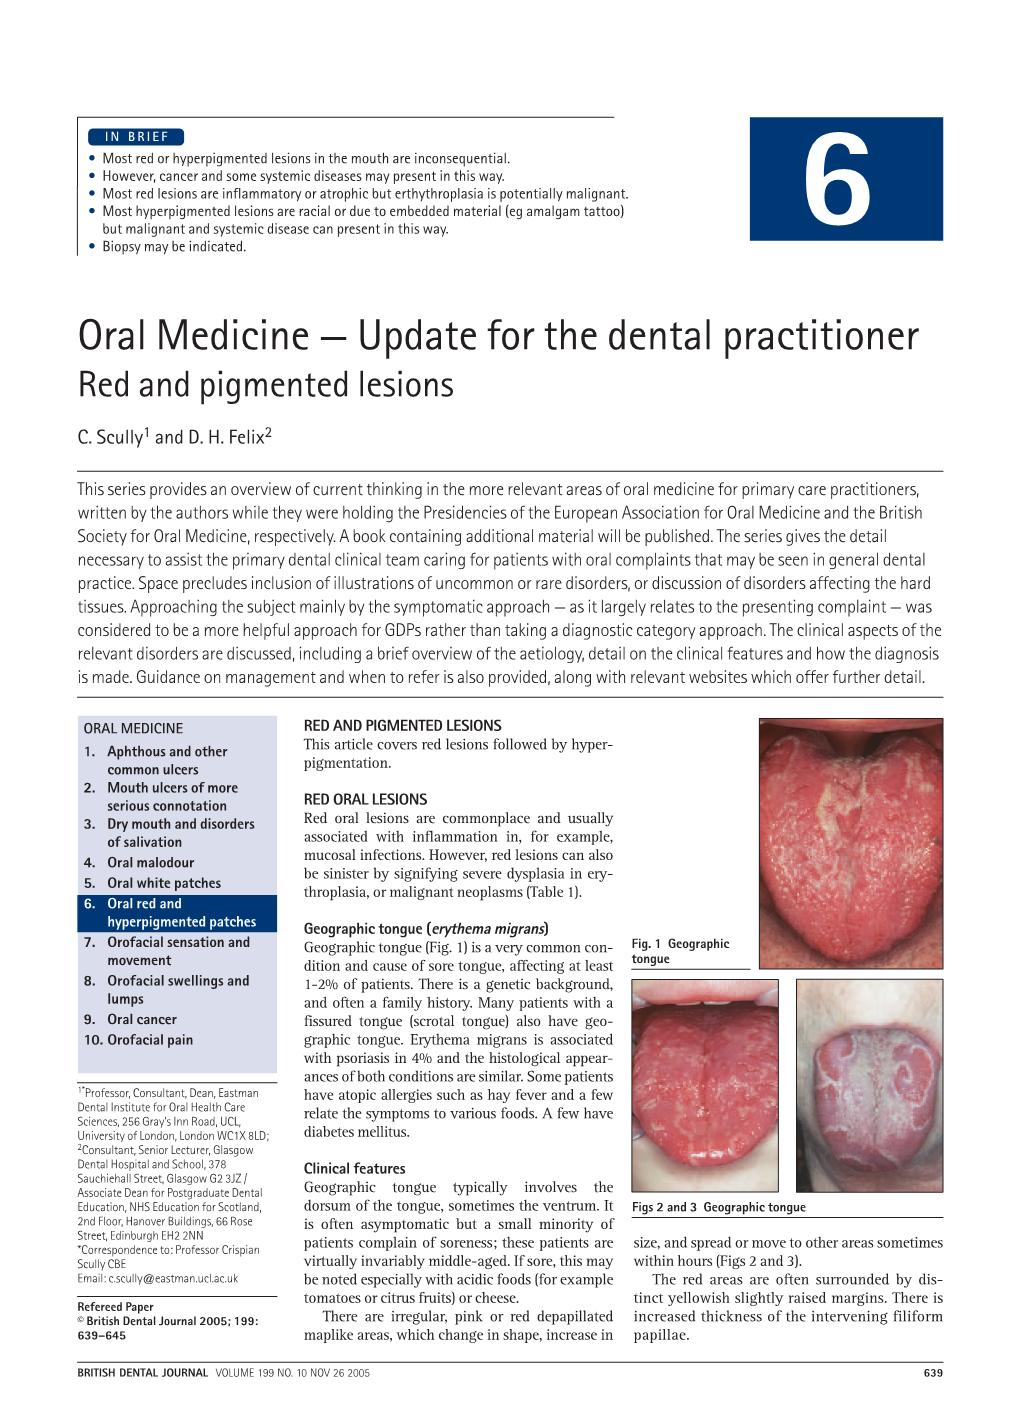 Oral Medicine — Update for the Dental Practitioner Red and Pigmented Lesions